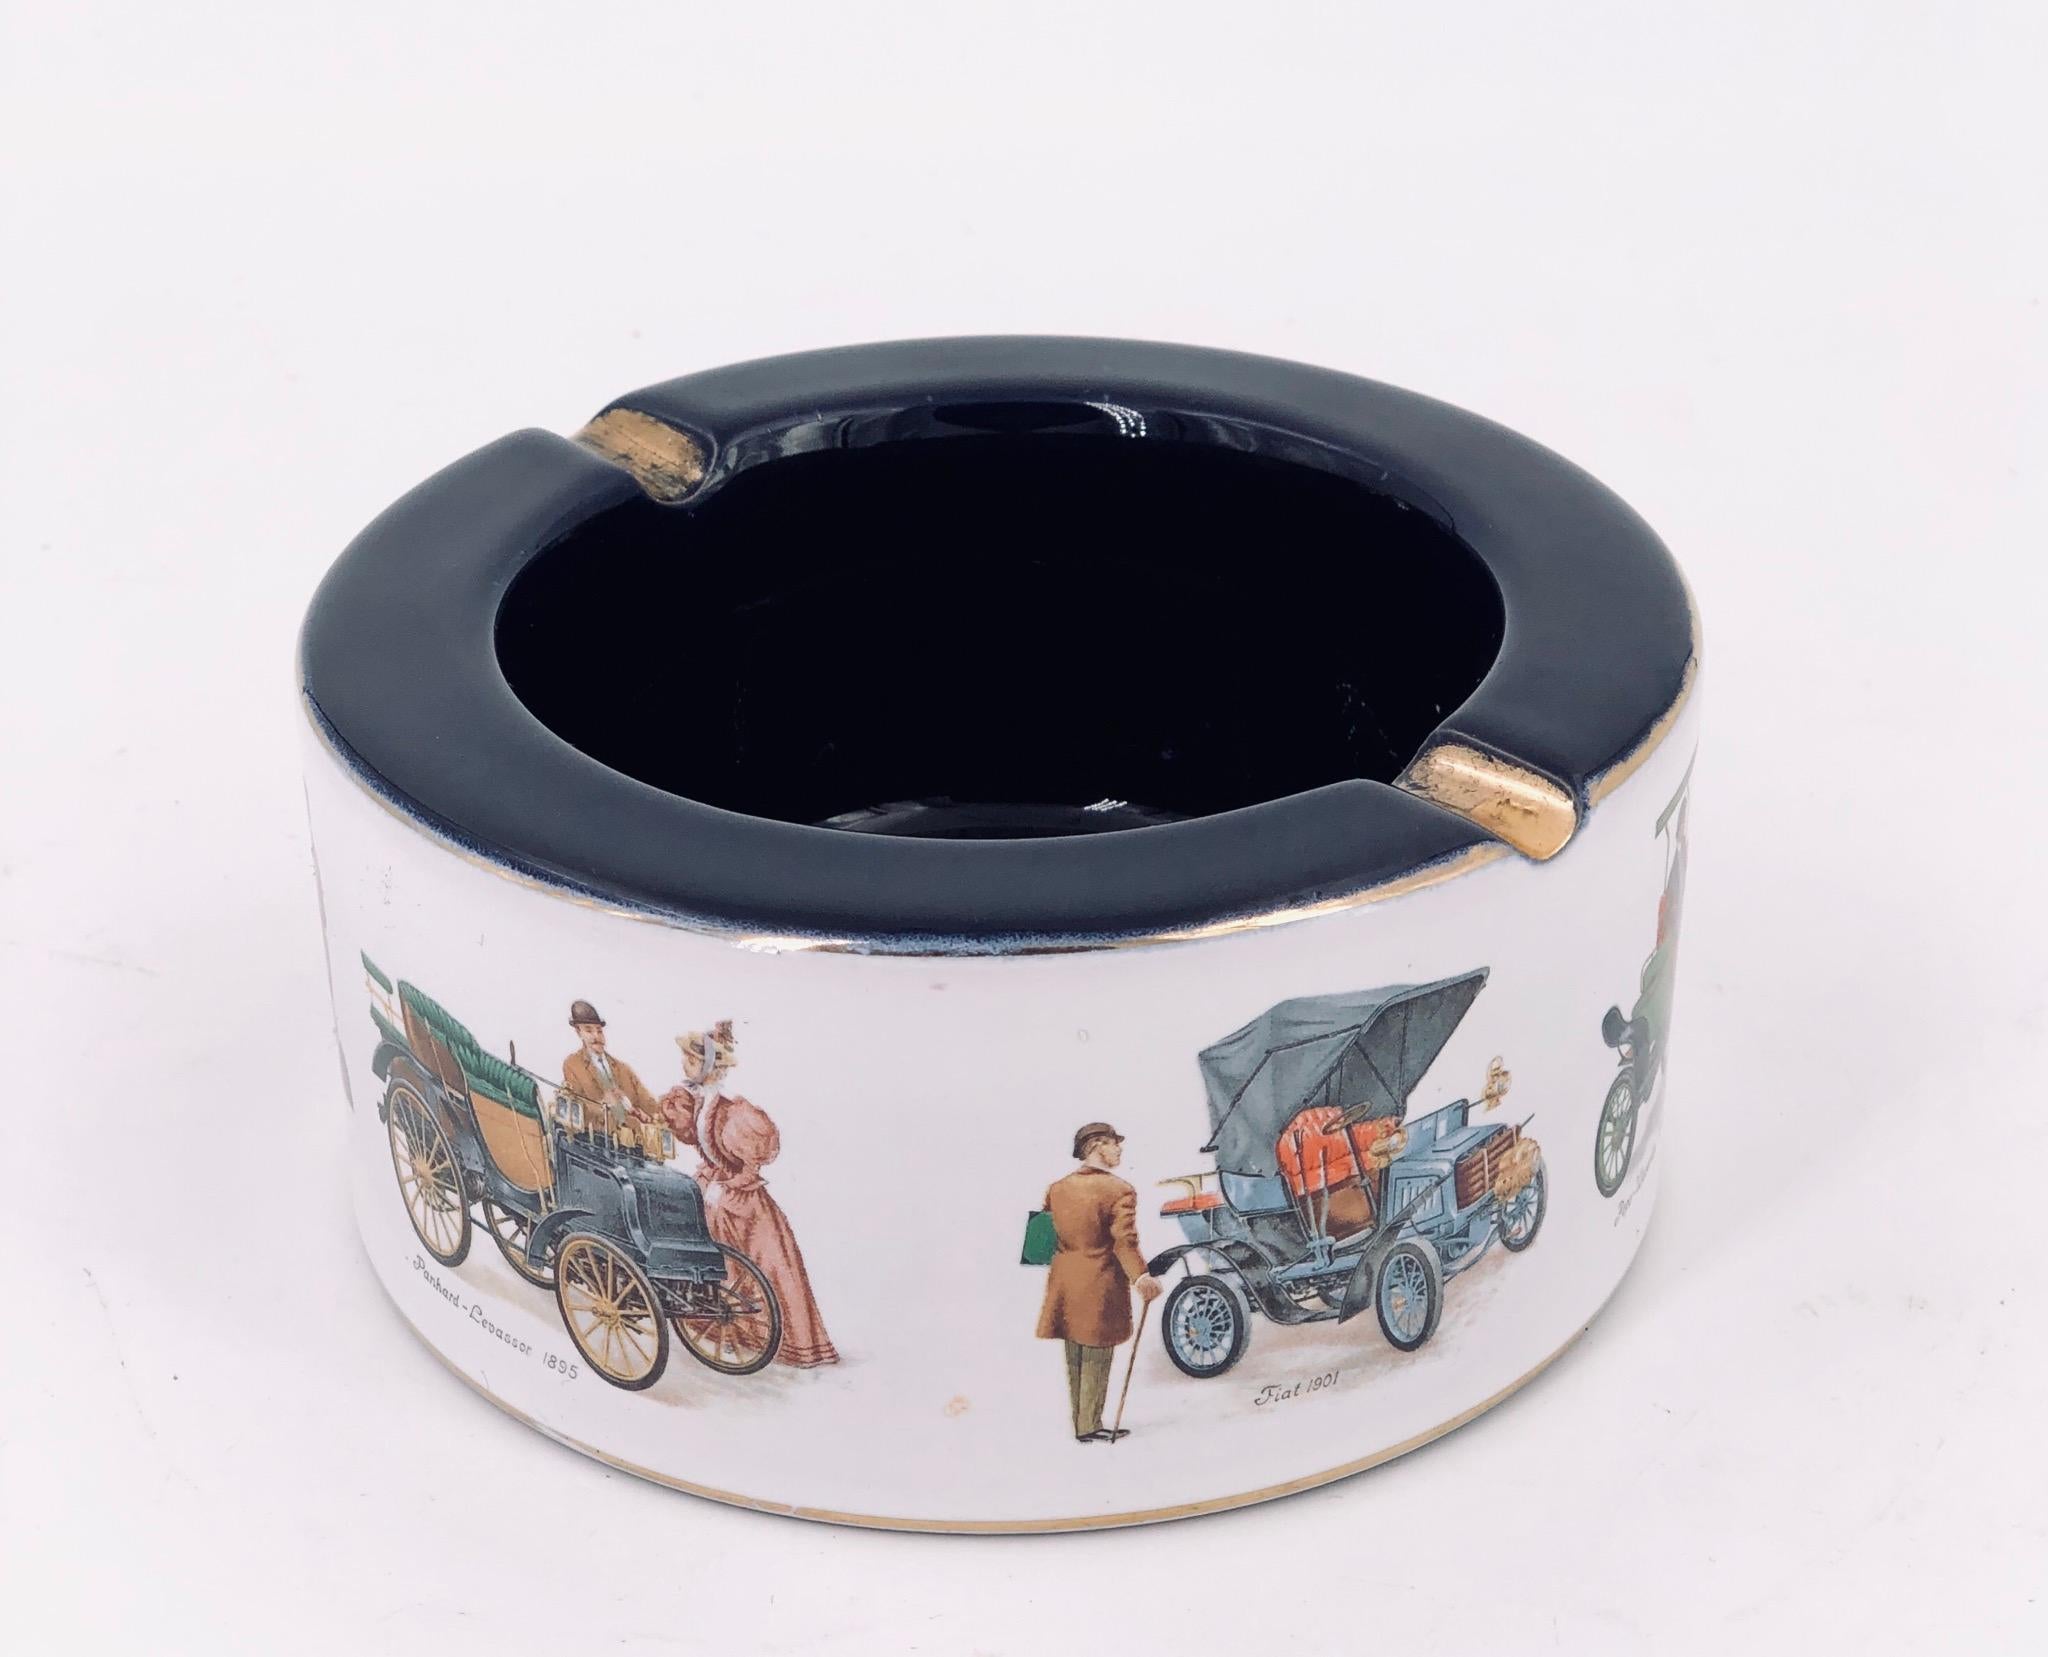 Classic Italian Florentine porcelain ashtray, depicting antique cars like Fiat, from the 1800s with gold accents a very collectible and rare piece.